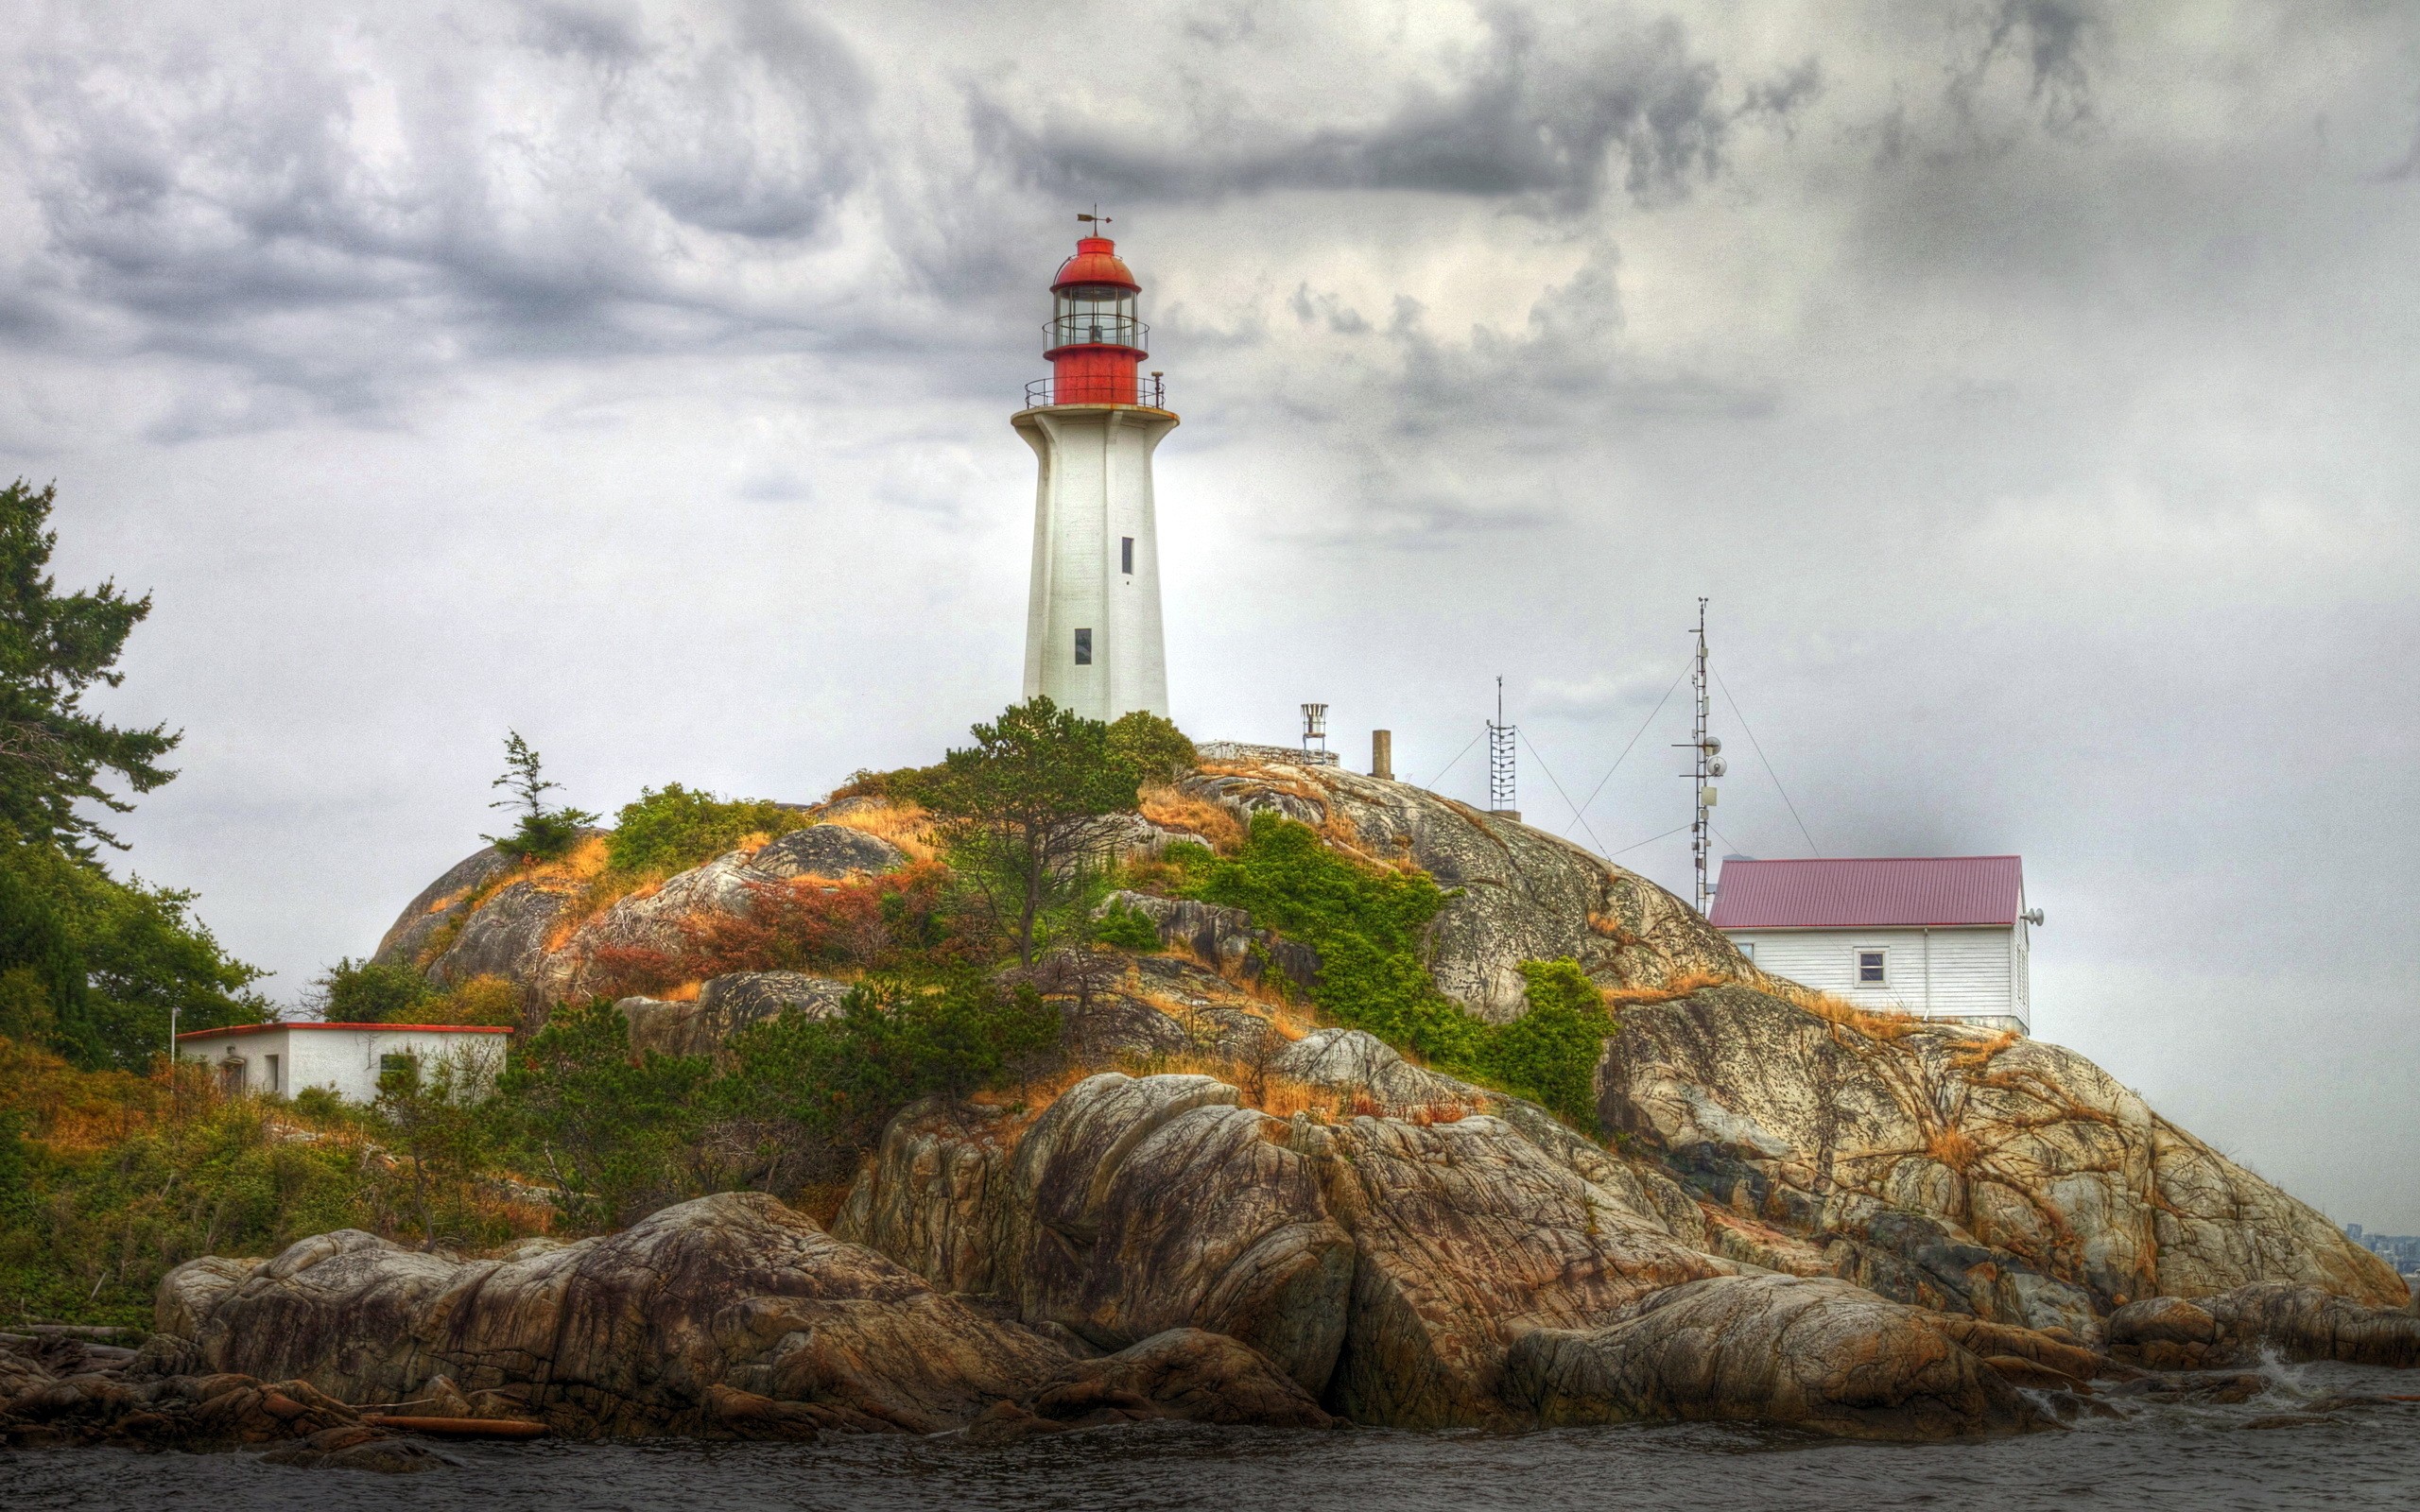 General 2560x1600 coast rocks clouds outdoors lighthouse HDR